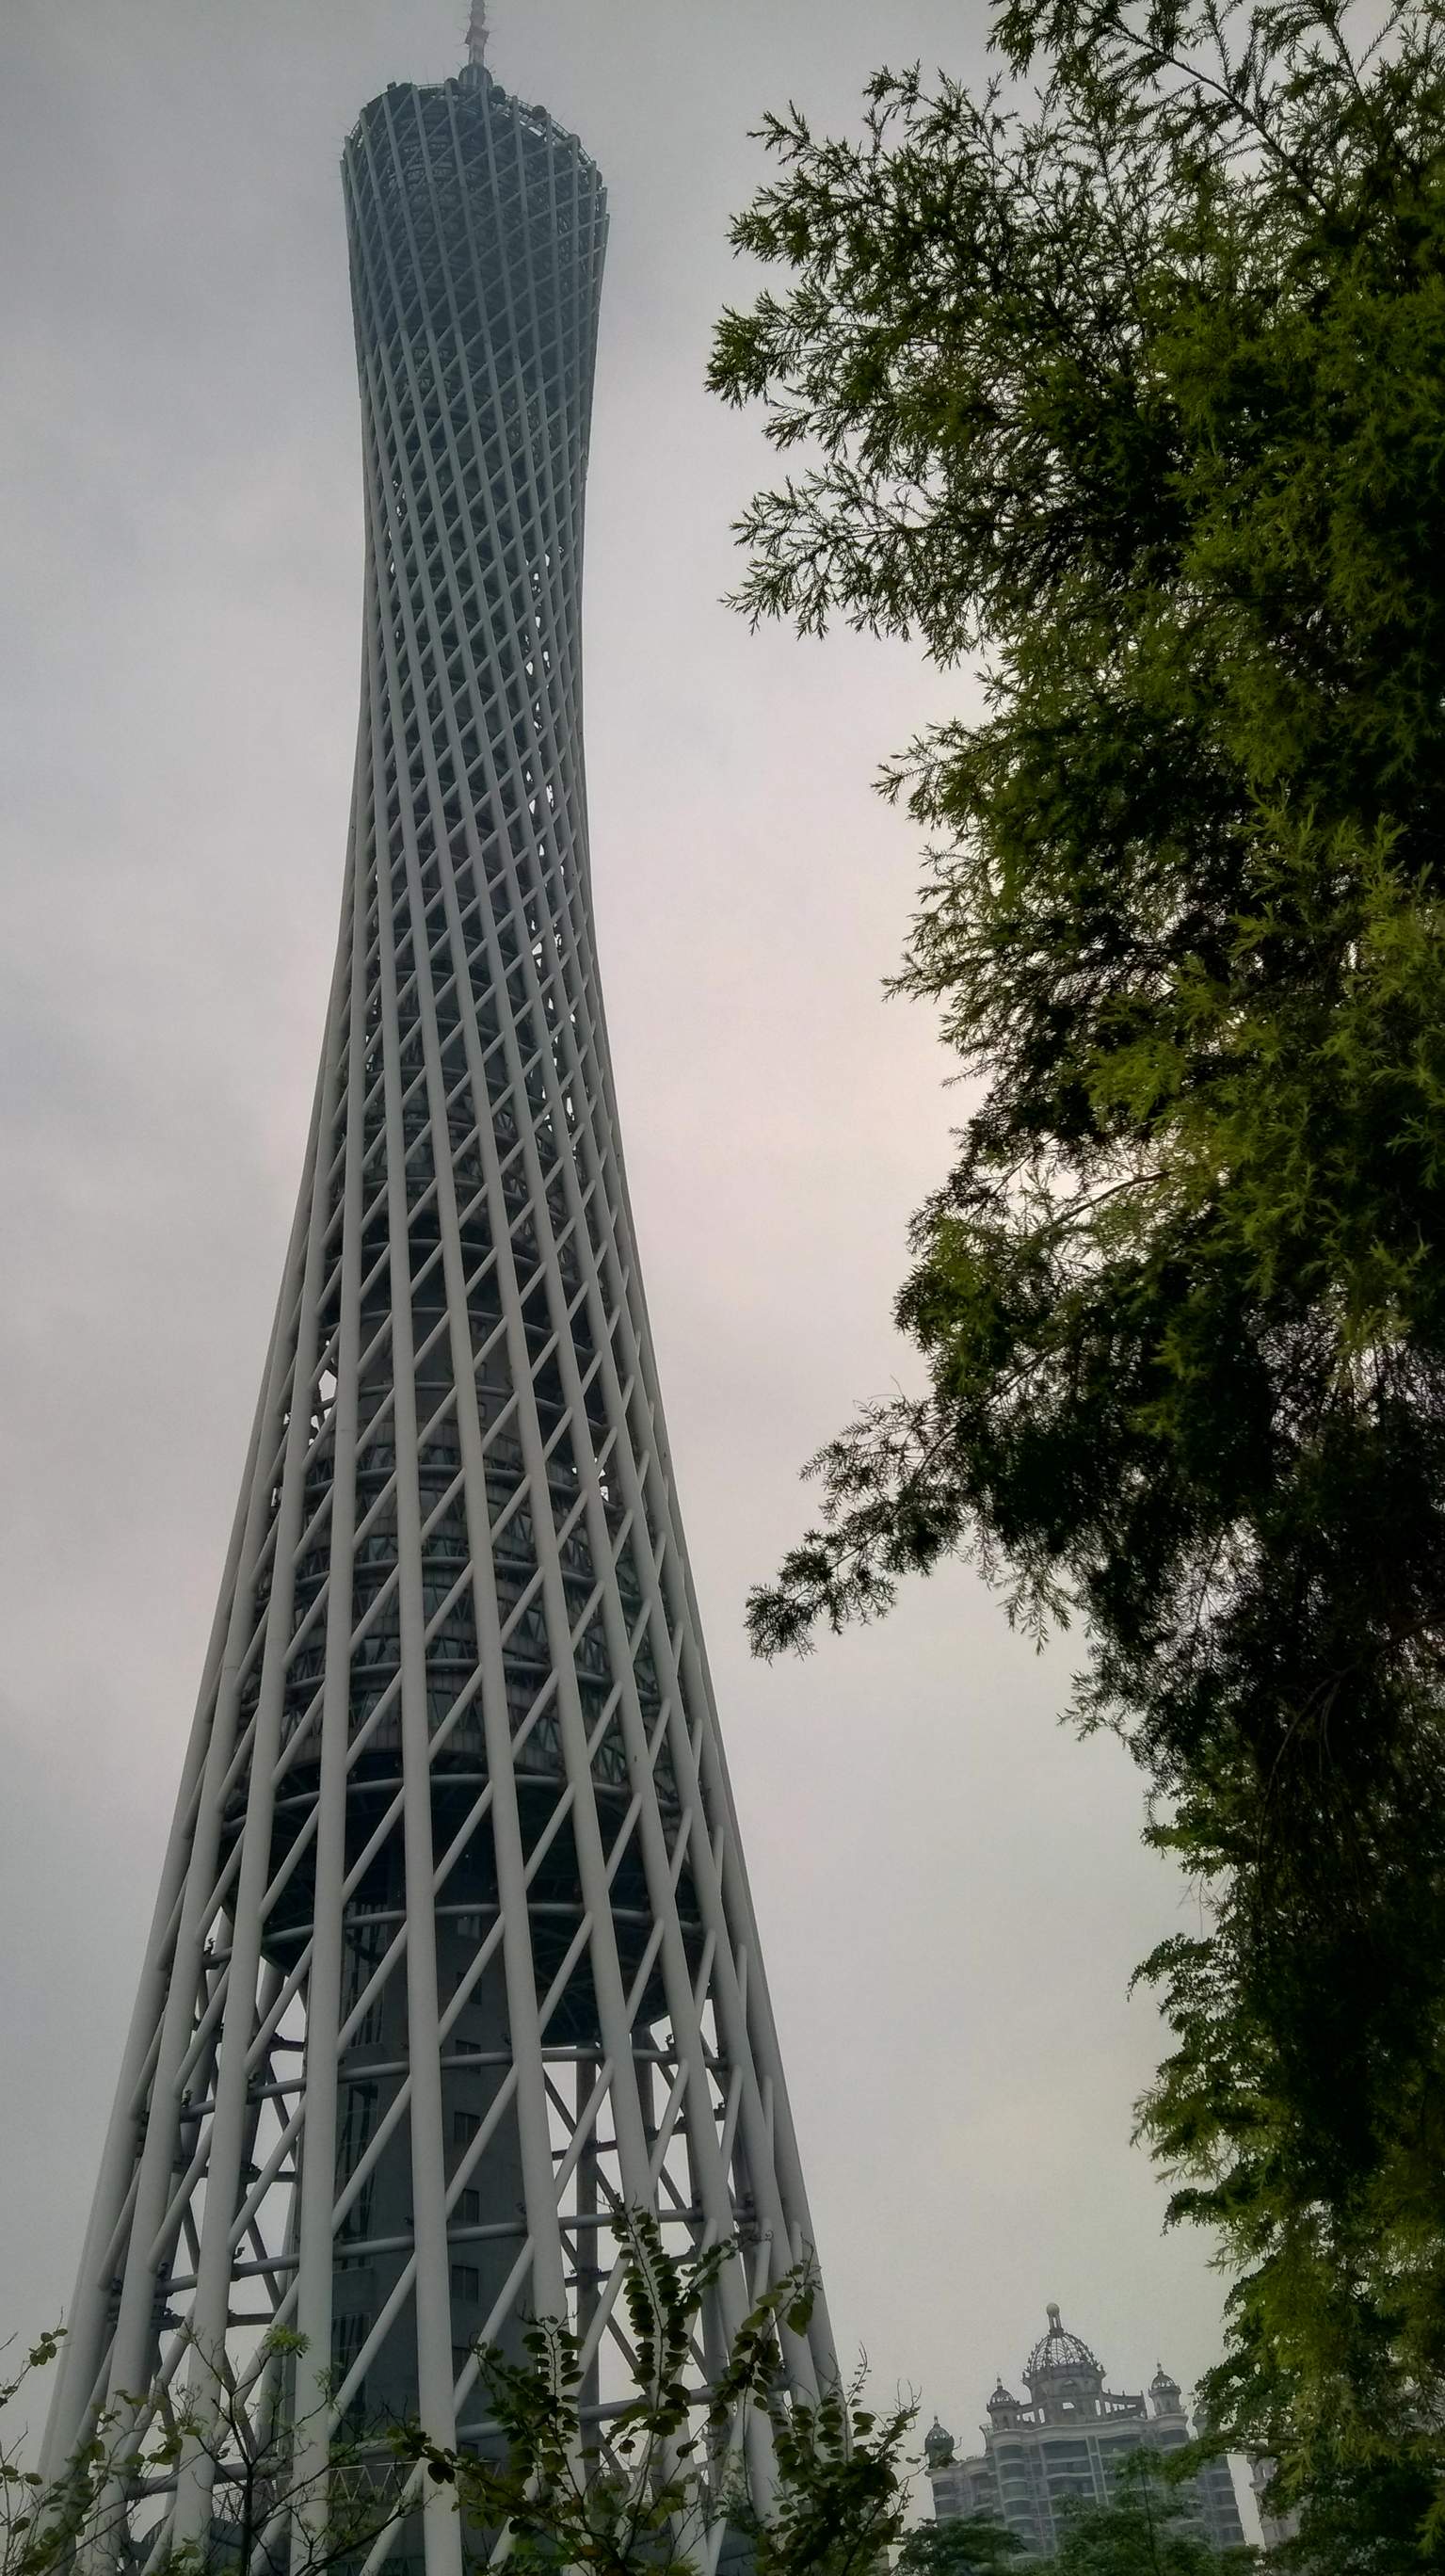 The Canton Tower, also known as the Guangzhou Tower or "Slim Waist" Tower.